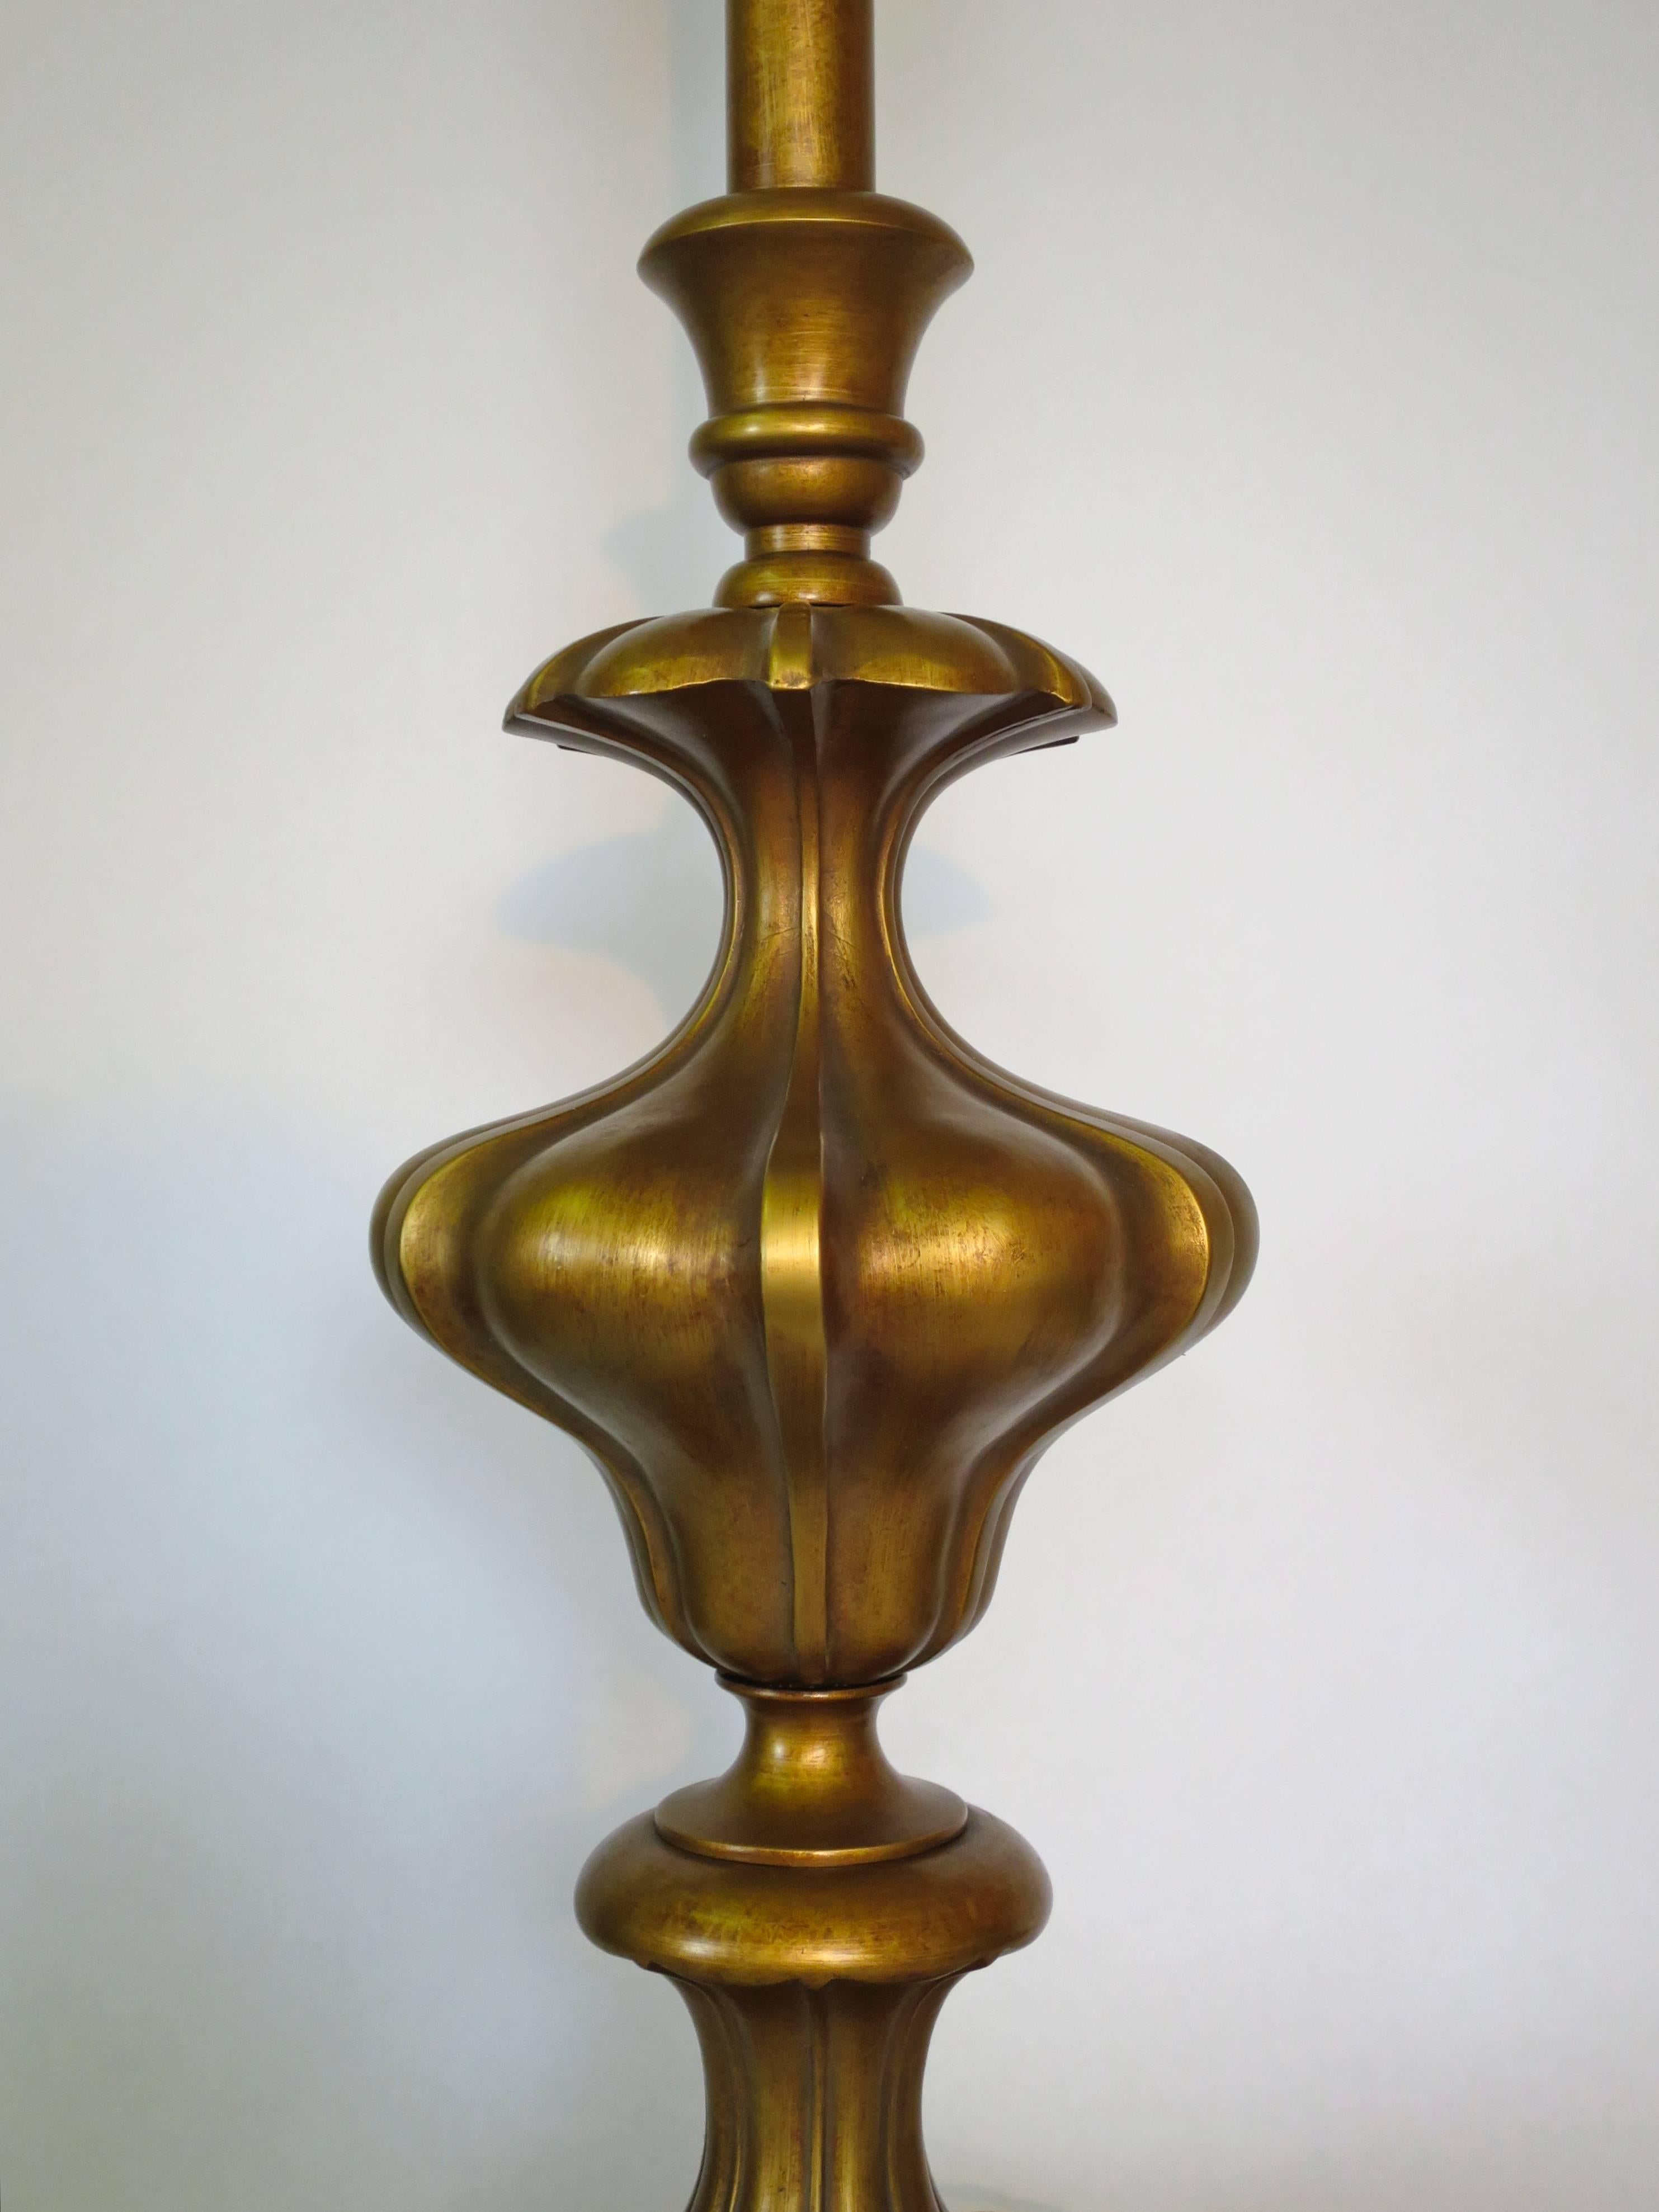 Monumental Rembrandt brass table lamp. Measures: 41